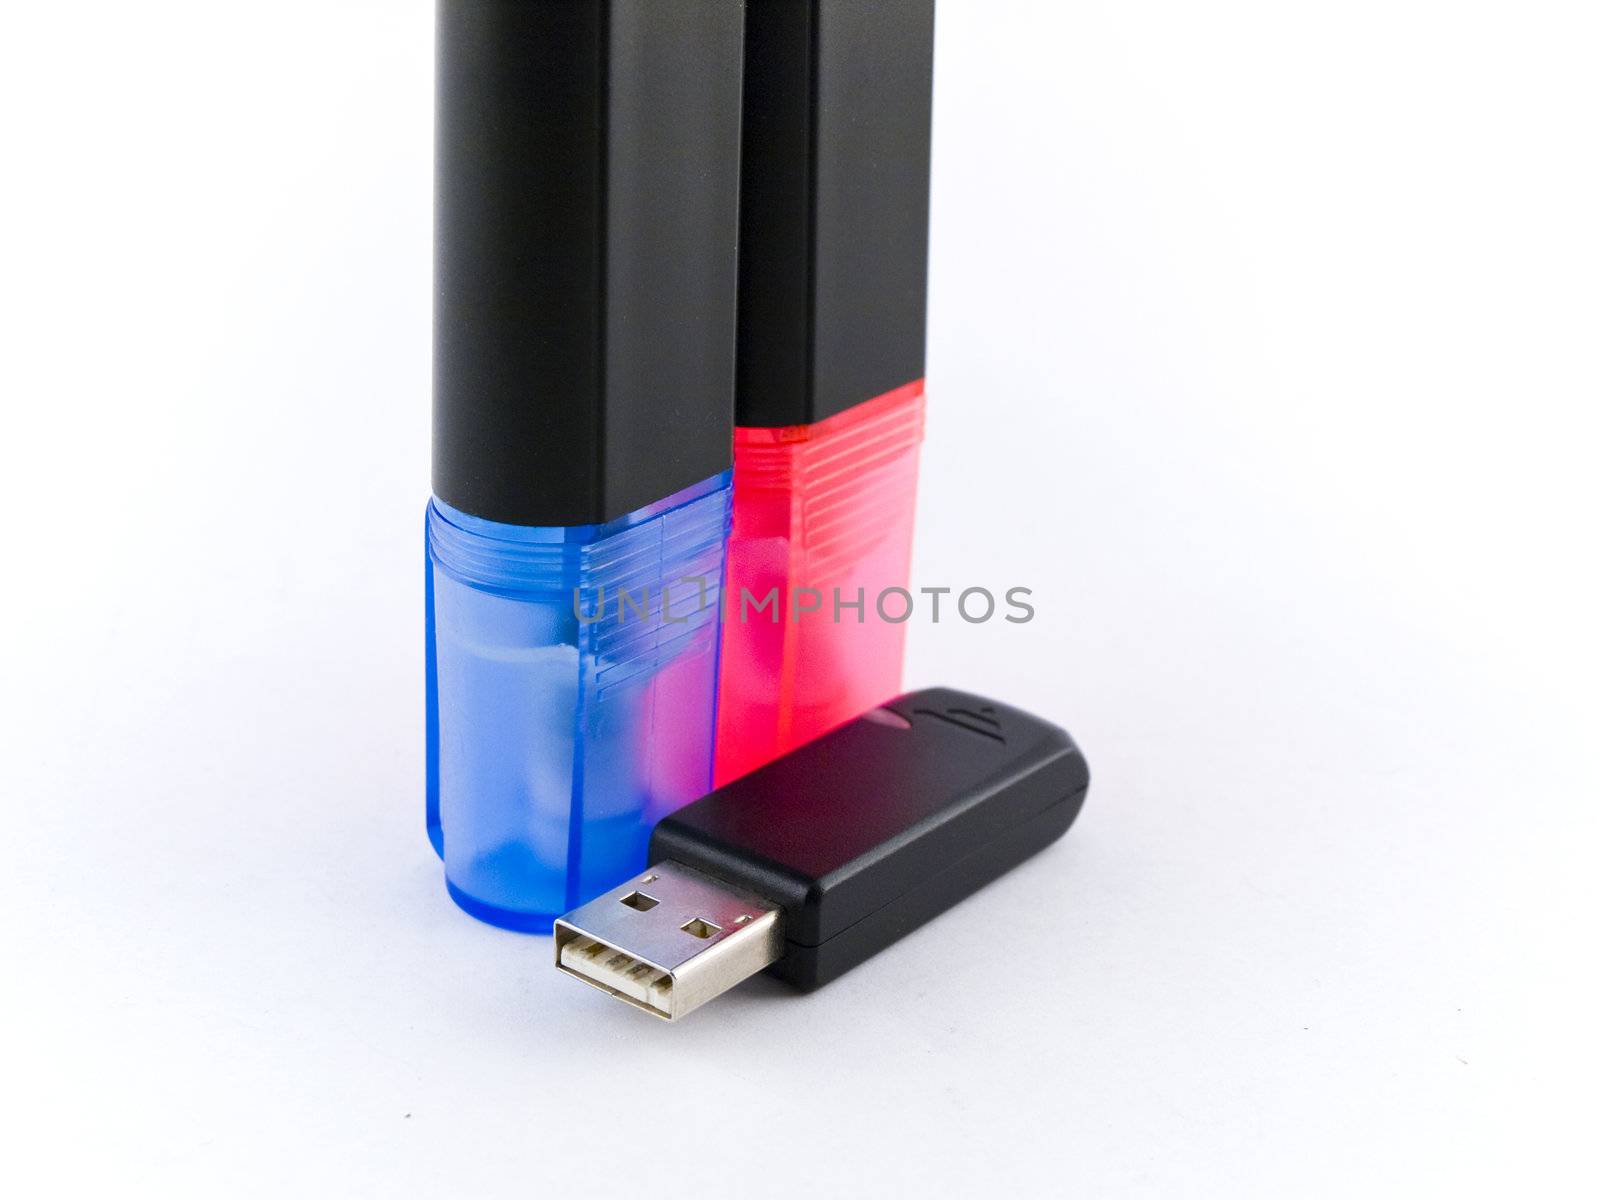 Bluetooth Dongle Memory Stick and Markers on White Background